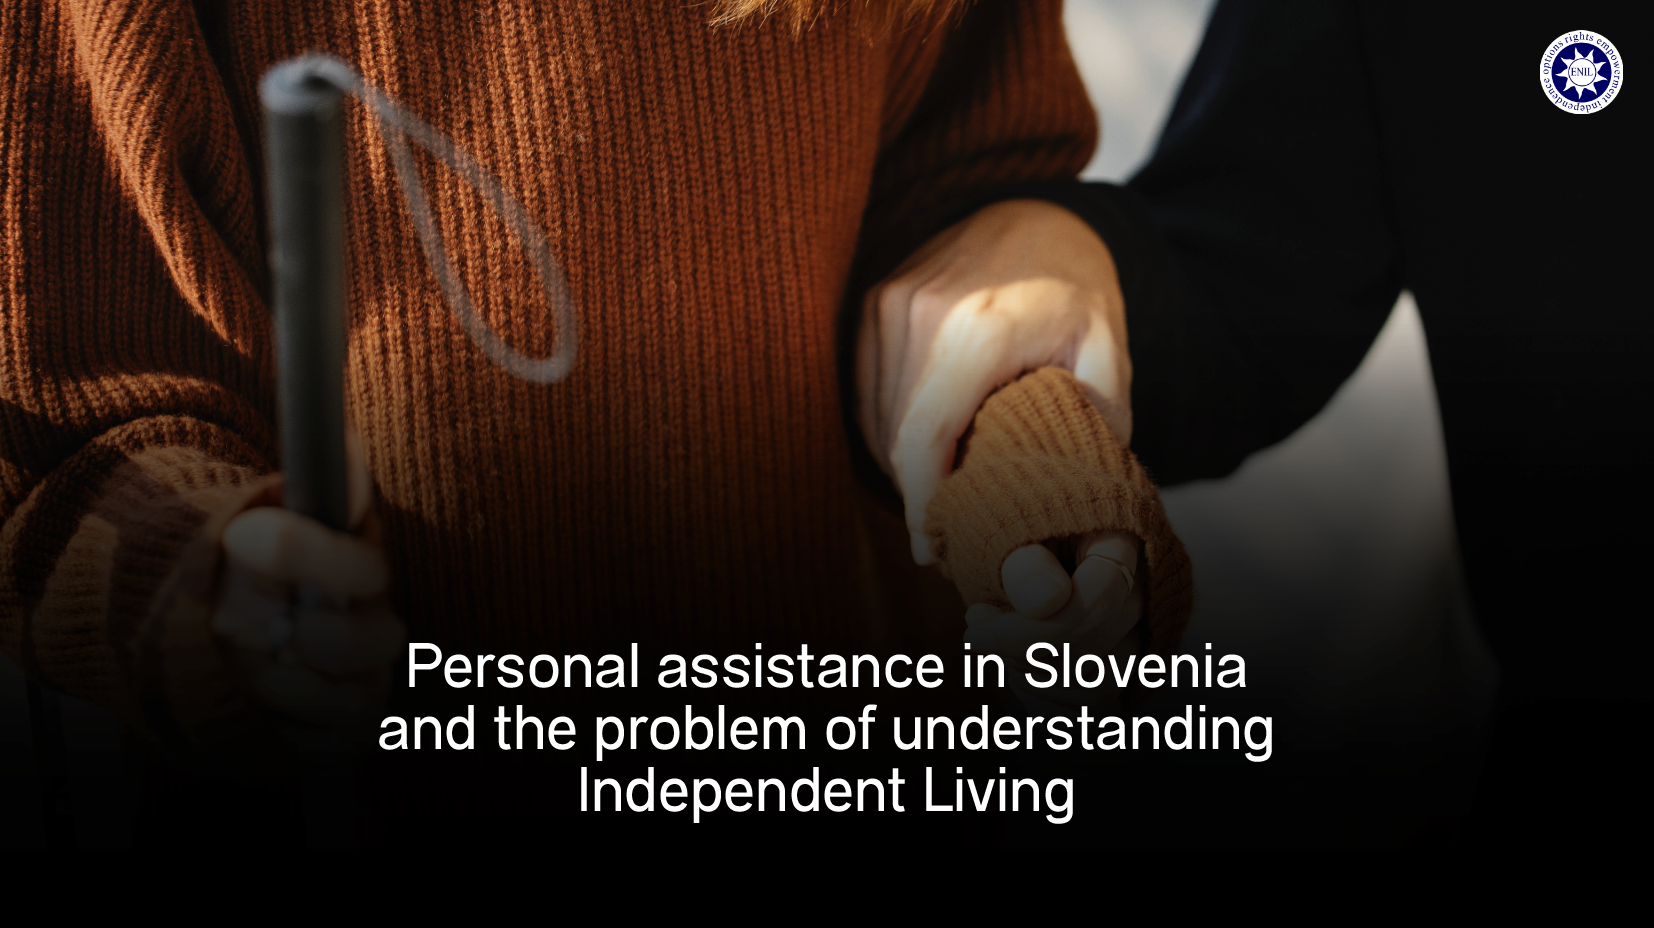 Photo of an assistant helping a blind person and the text says "Personal assistance in Slovenia and the problem of understanding Independent Living"